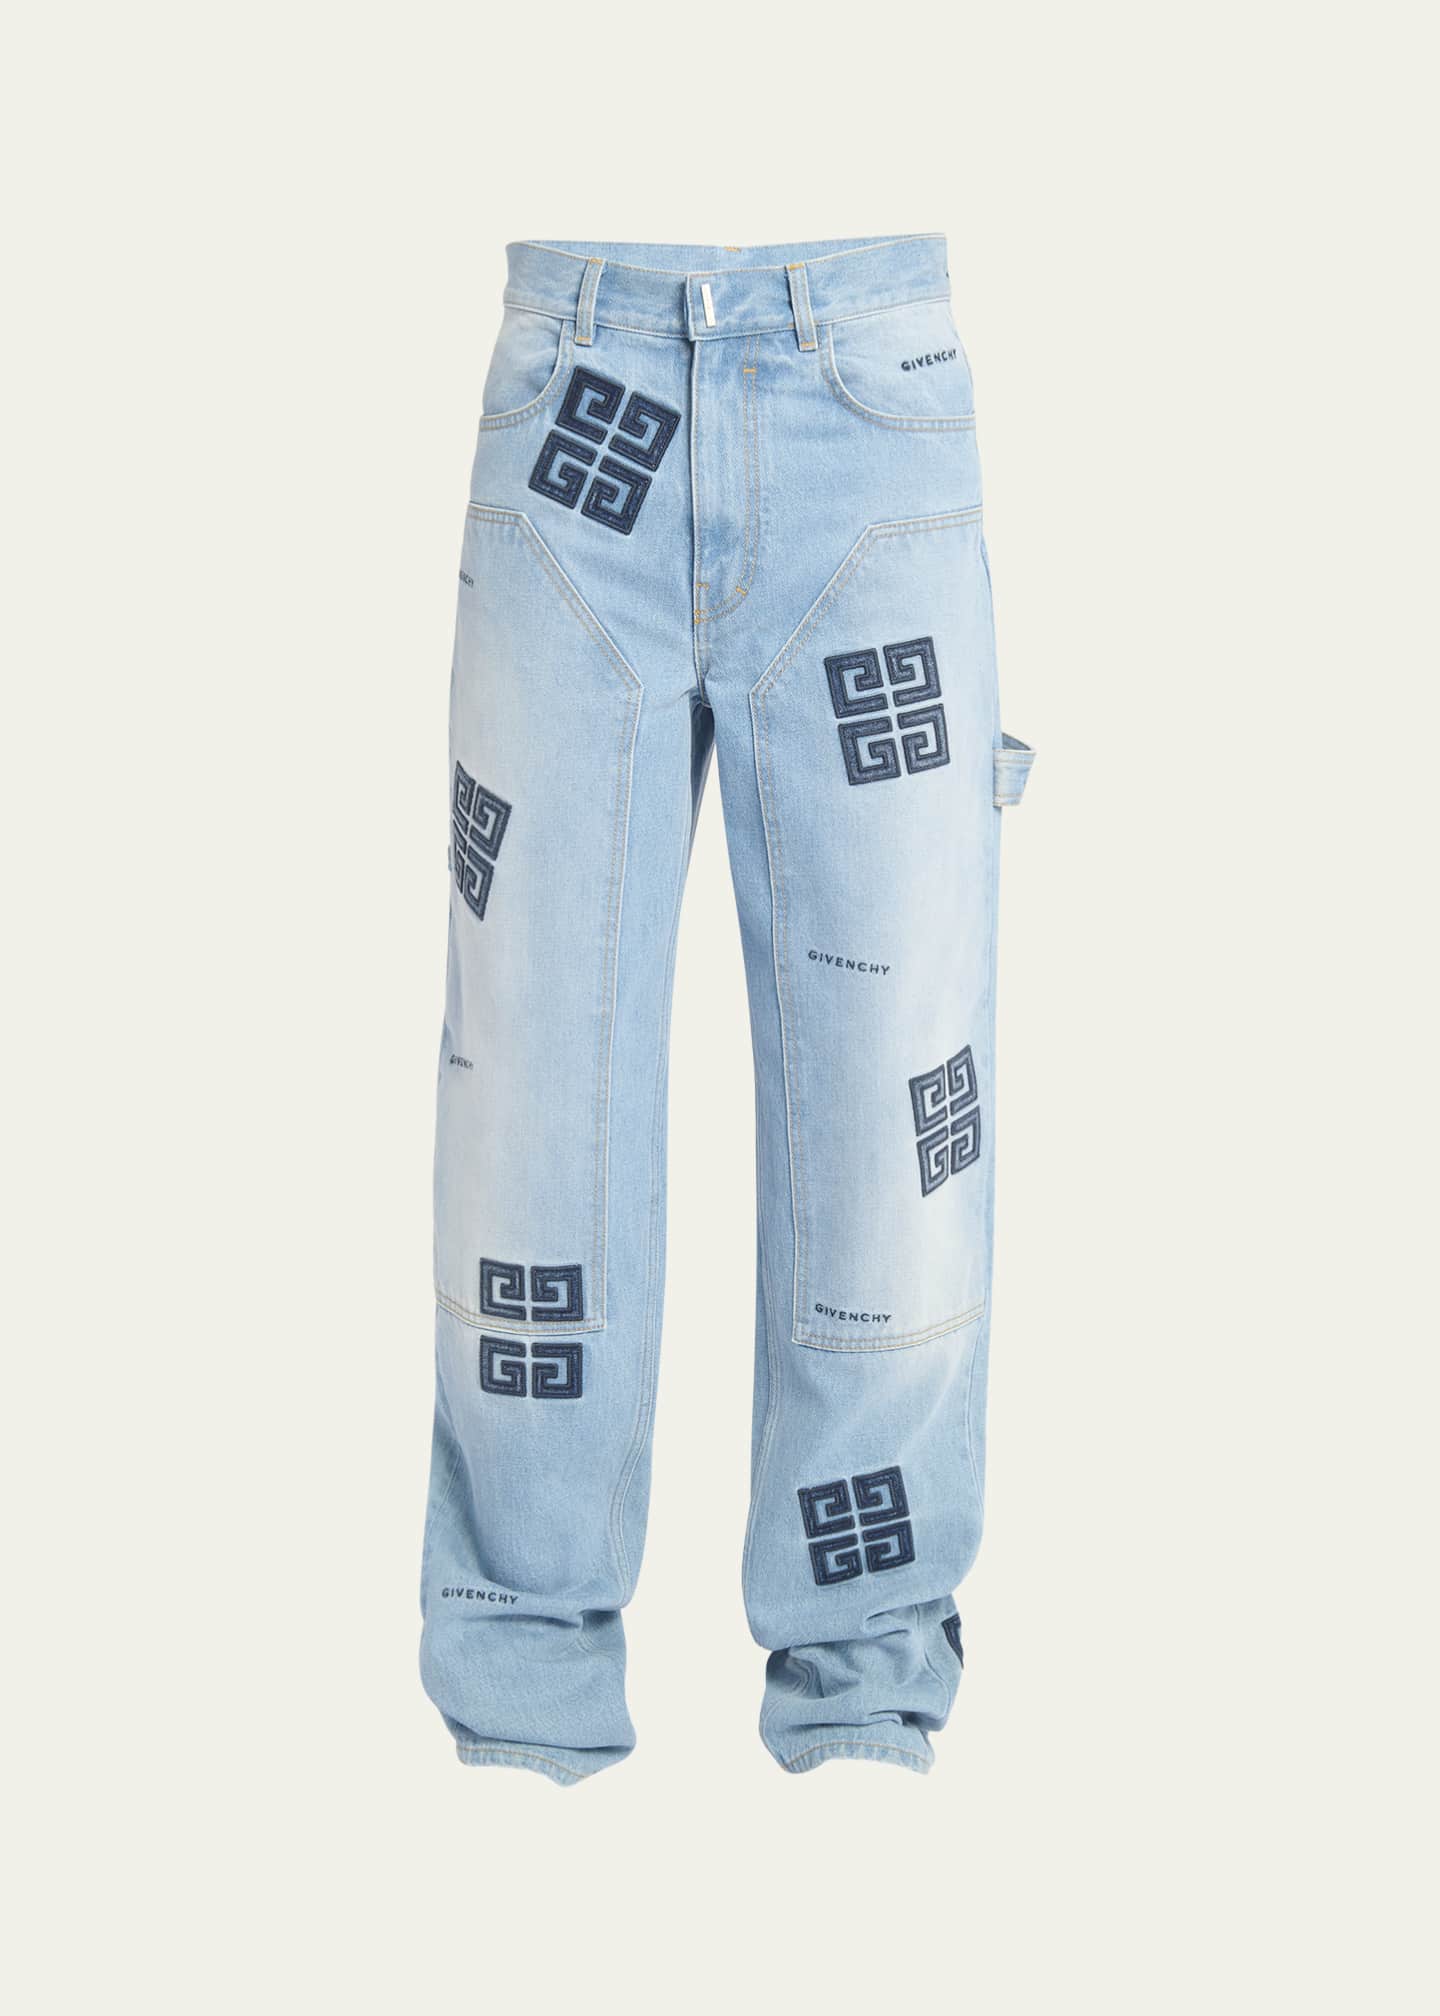 Givenchy Carpenter Jeans